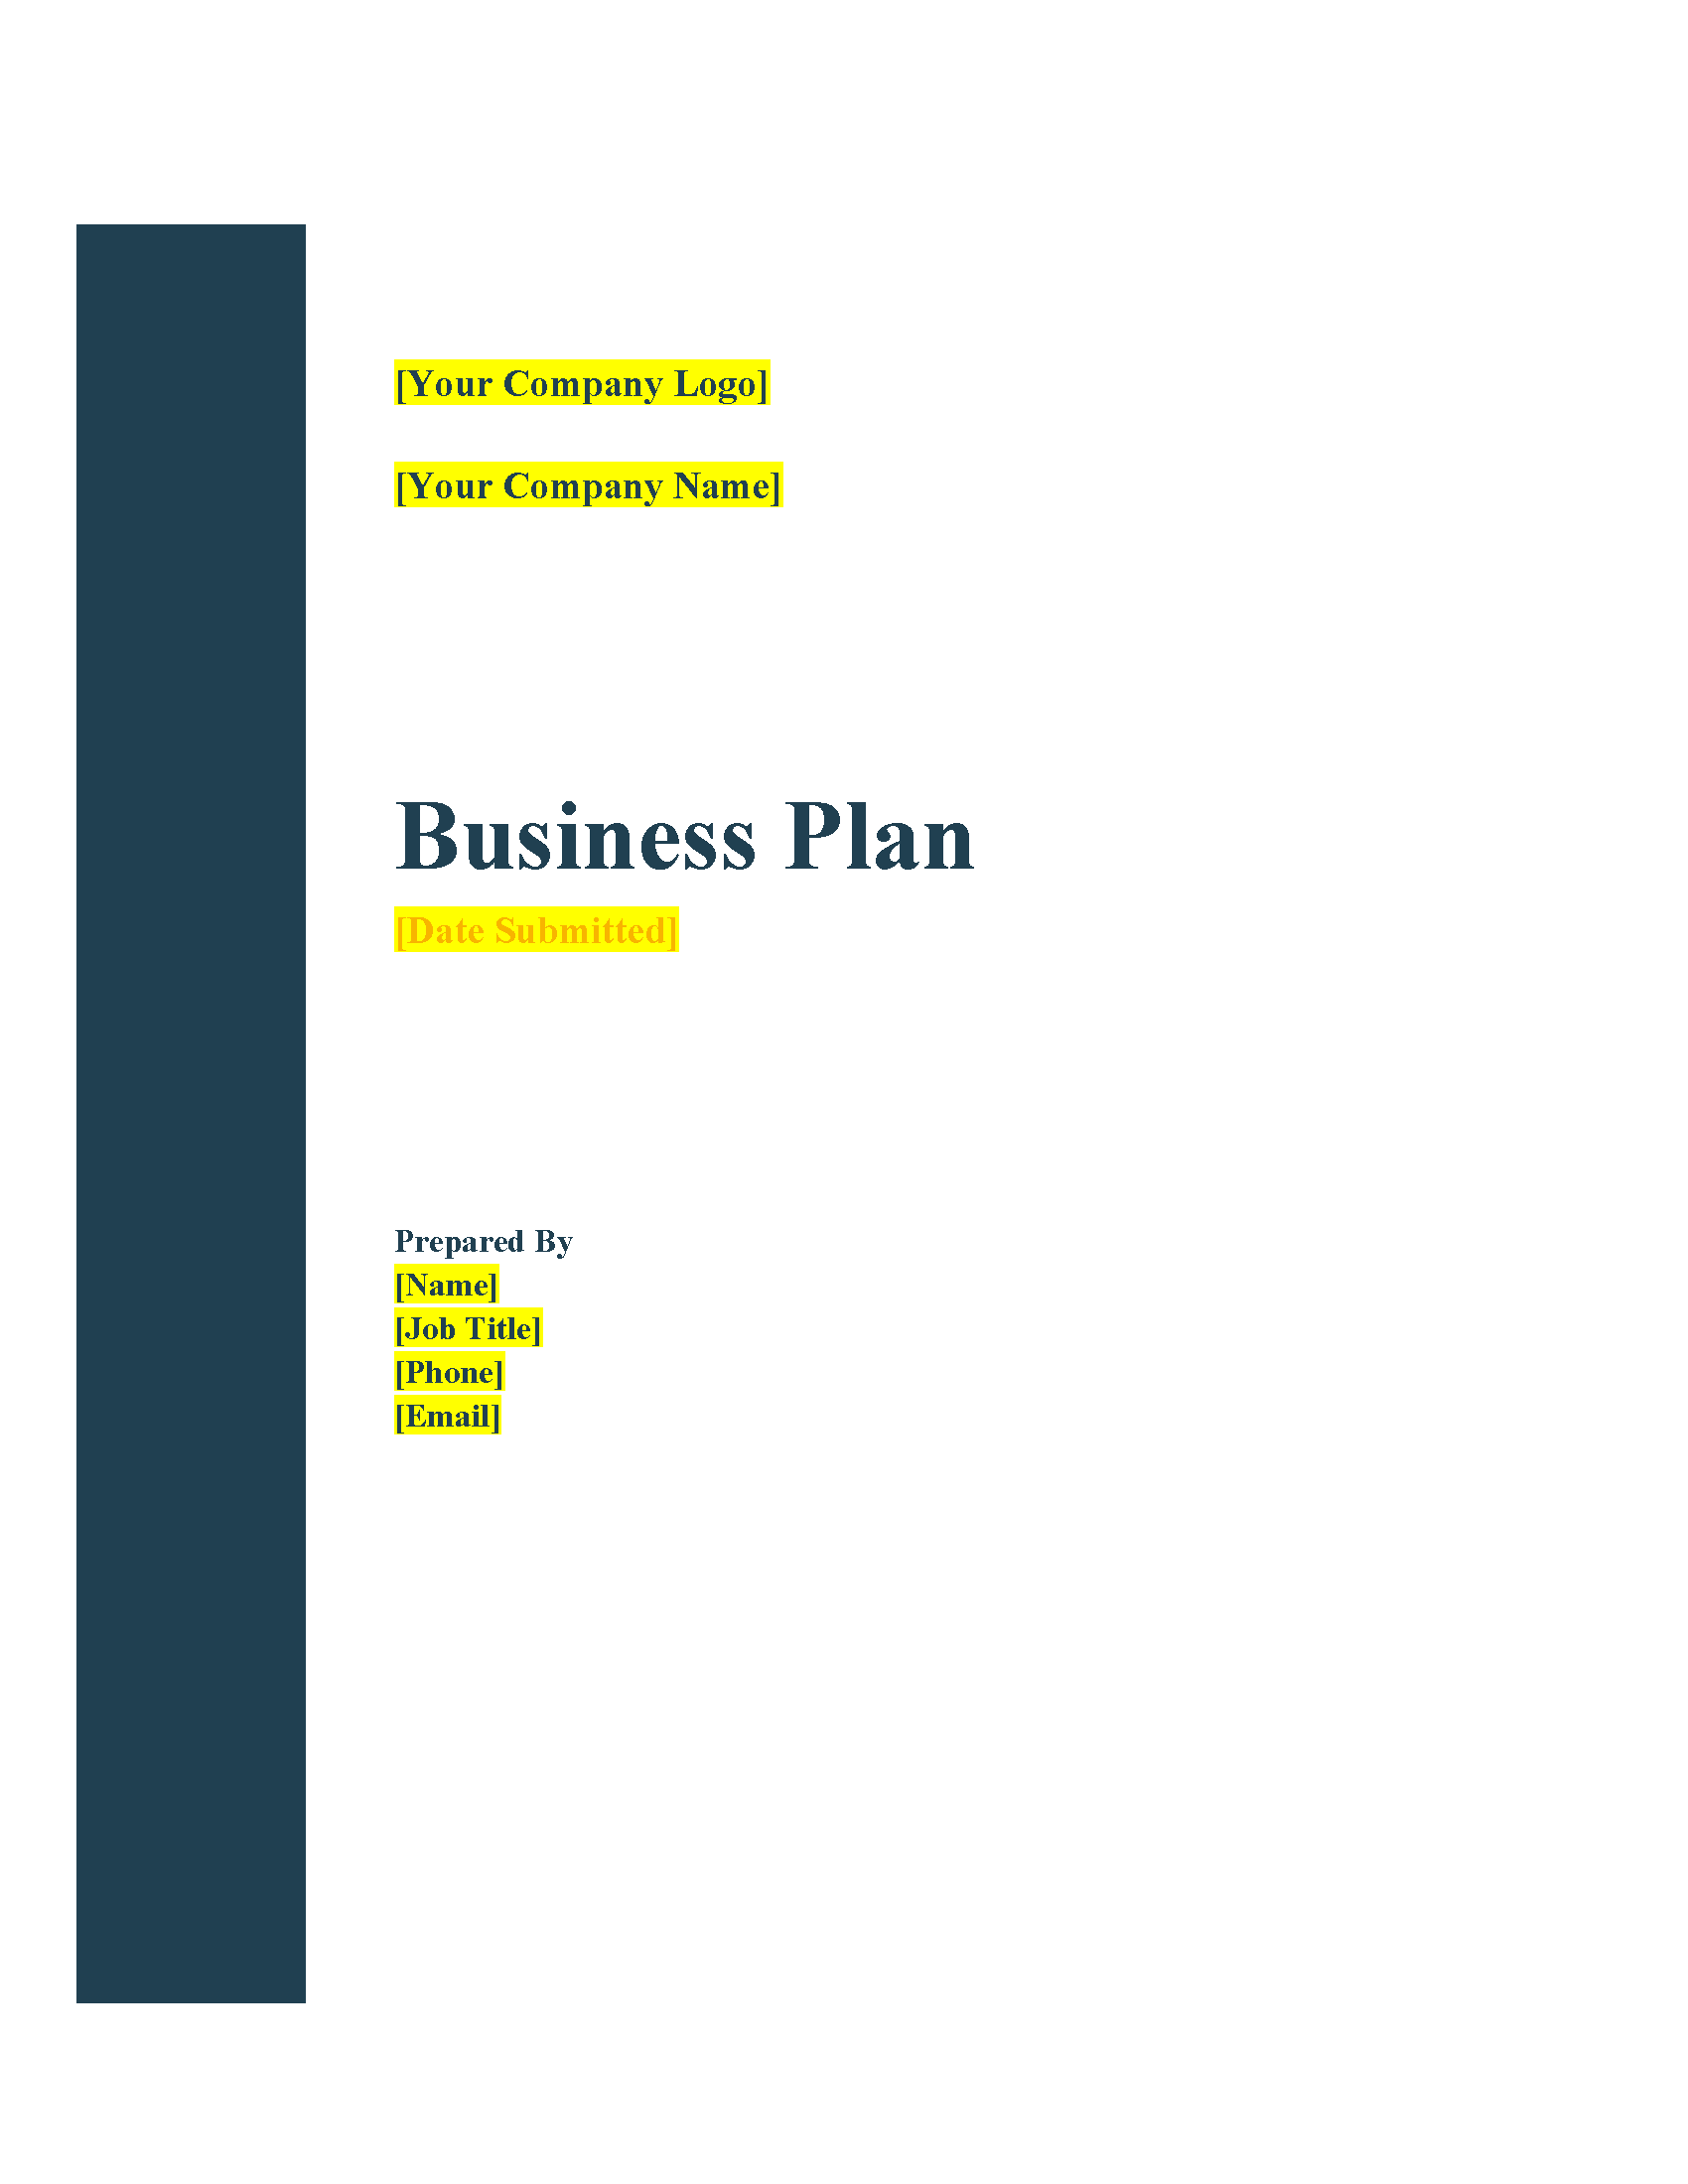 23 - IT Security Business Plan Template